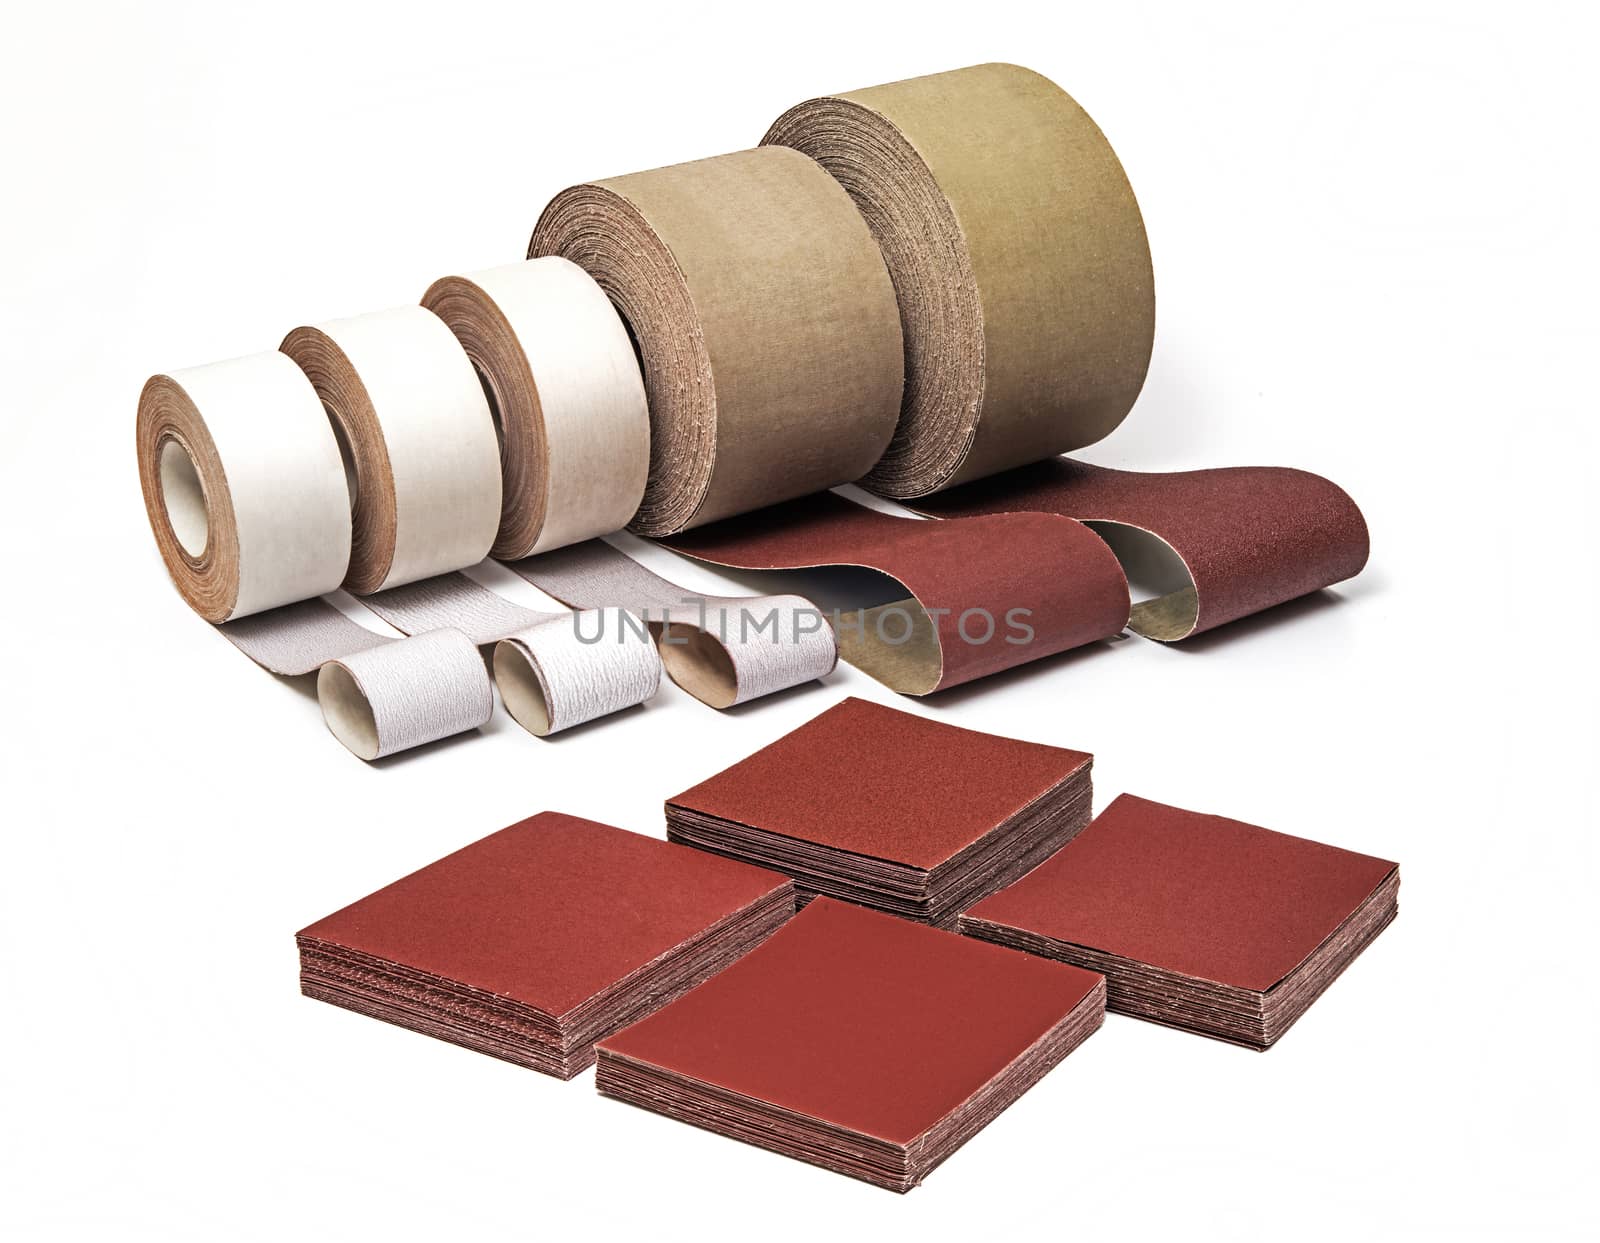 Industrial Sanding Belts, Sand Papers in Rolls and Sandpaper She by praethip